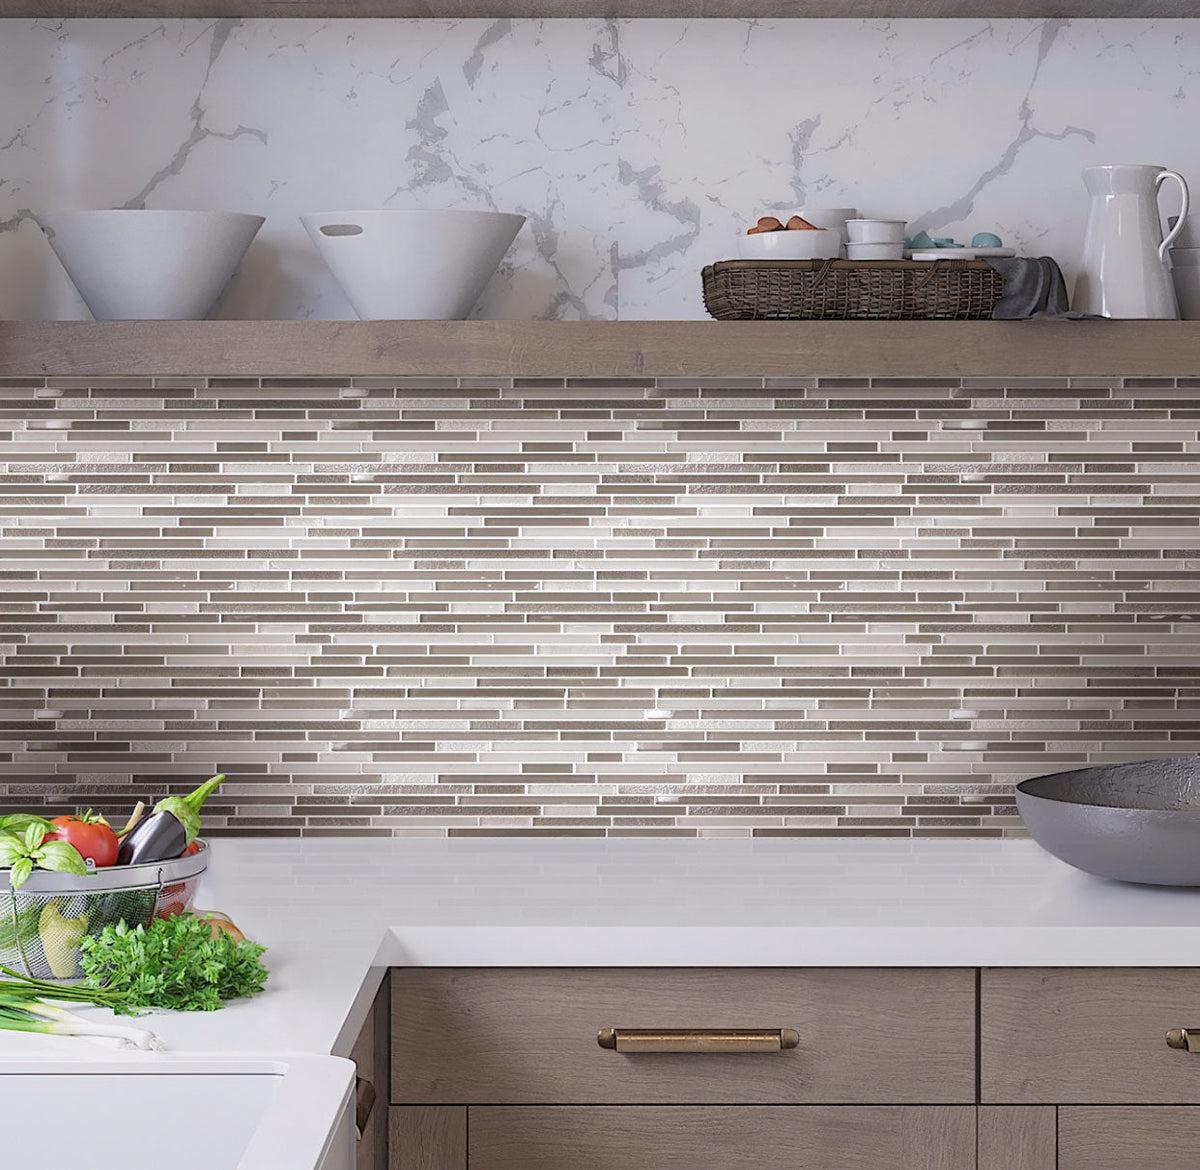 Waterfall White And Grey Linear Glass MosaicKitchen Tile